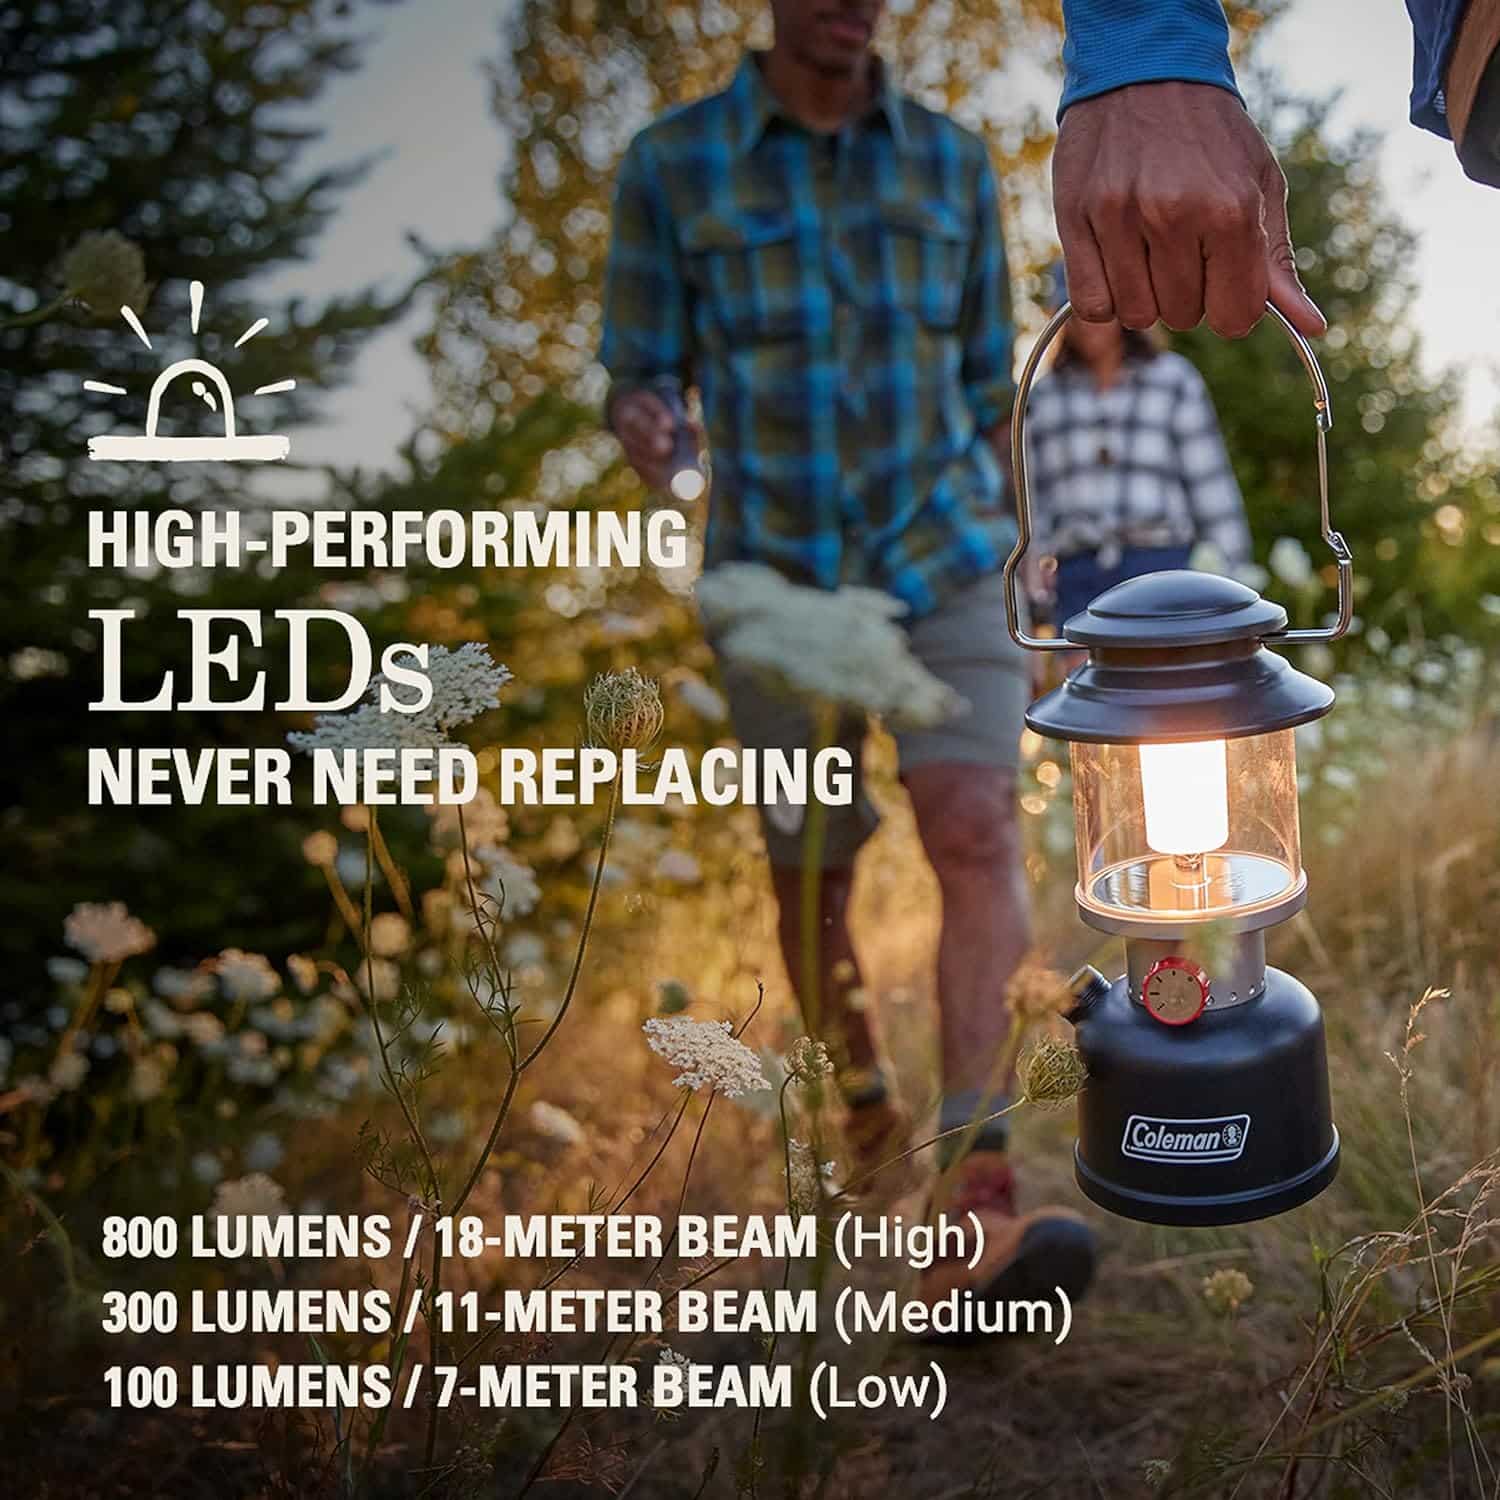 Coleman Classic Recharge 400/800 Lumens LED Lantern, Durable Impact  Water-Resistant Lantern with Rechargeable Batteries  Handle for Carrying or Hanging, Great for Camping, Emergencies,  More